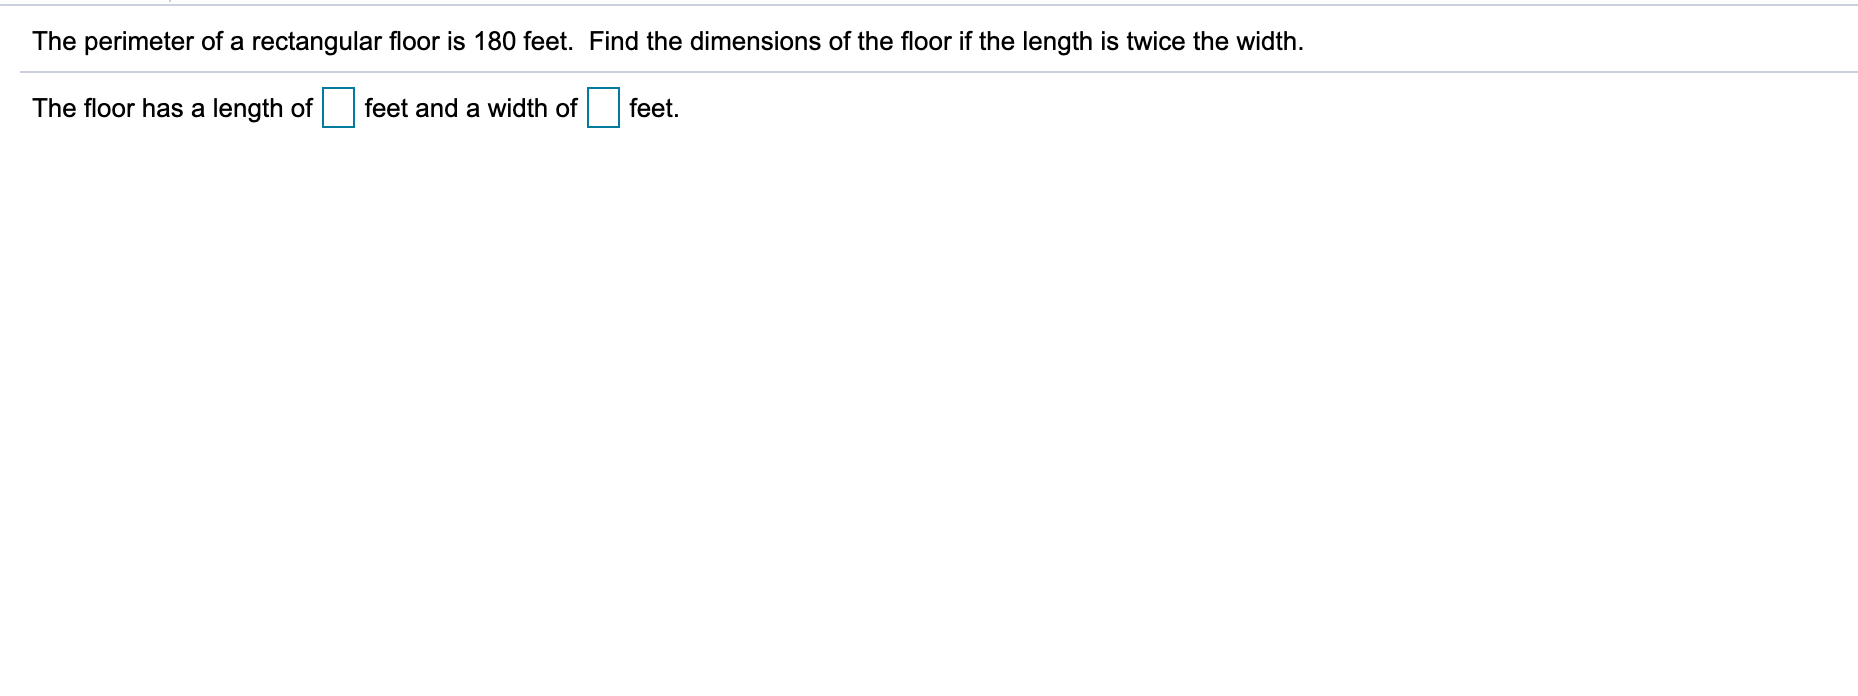 The perimeter of a rectangular floor is 180 feet. Find the dimensions of the floor if the length is twice the width.
The floor has a length of
feet and a width of
feet.
